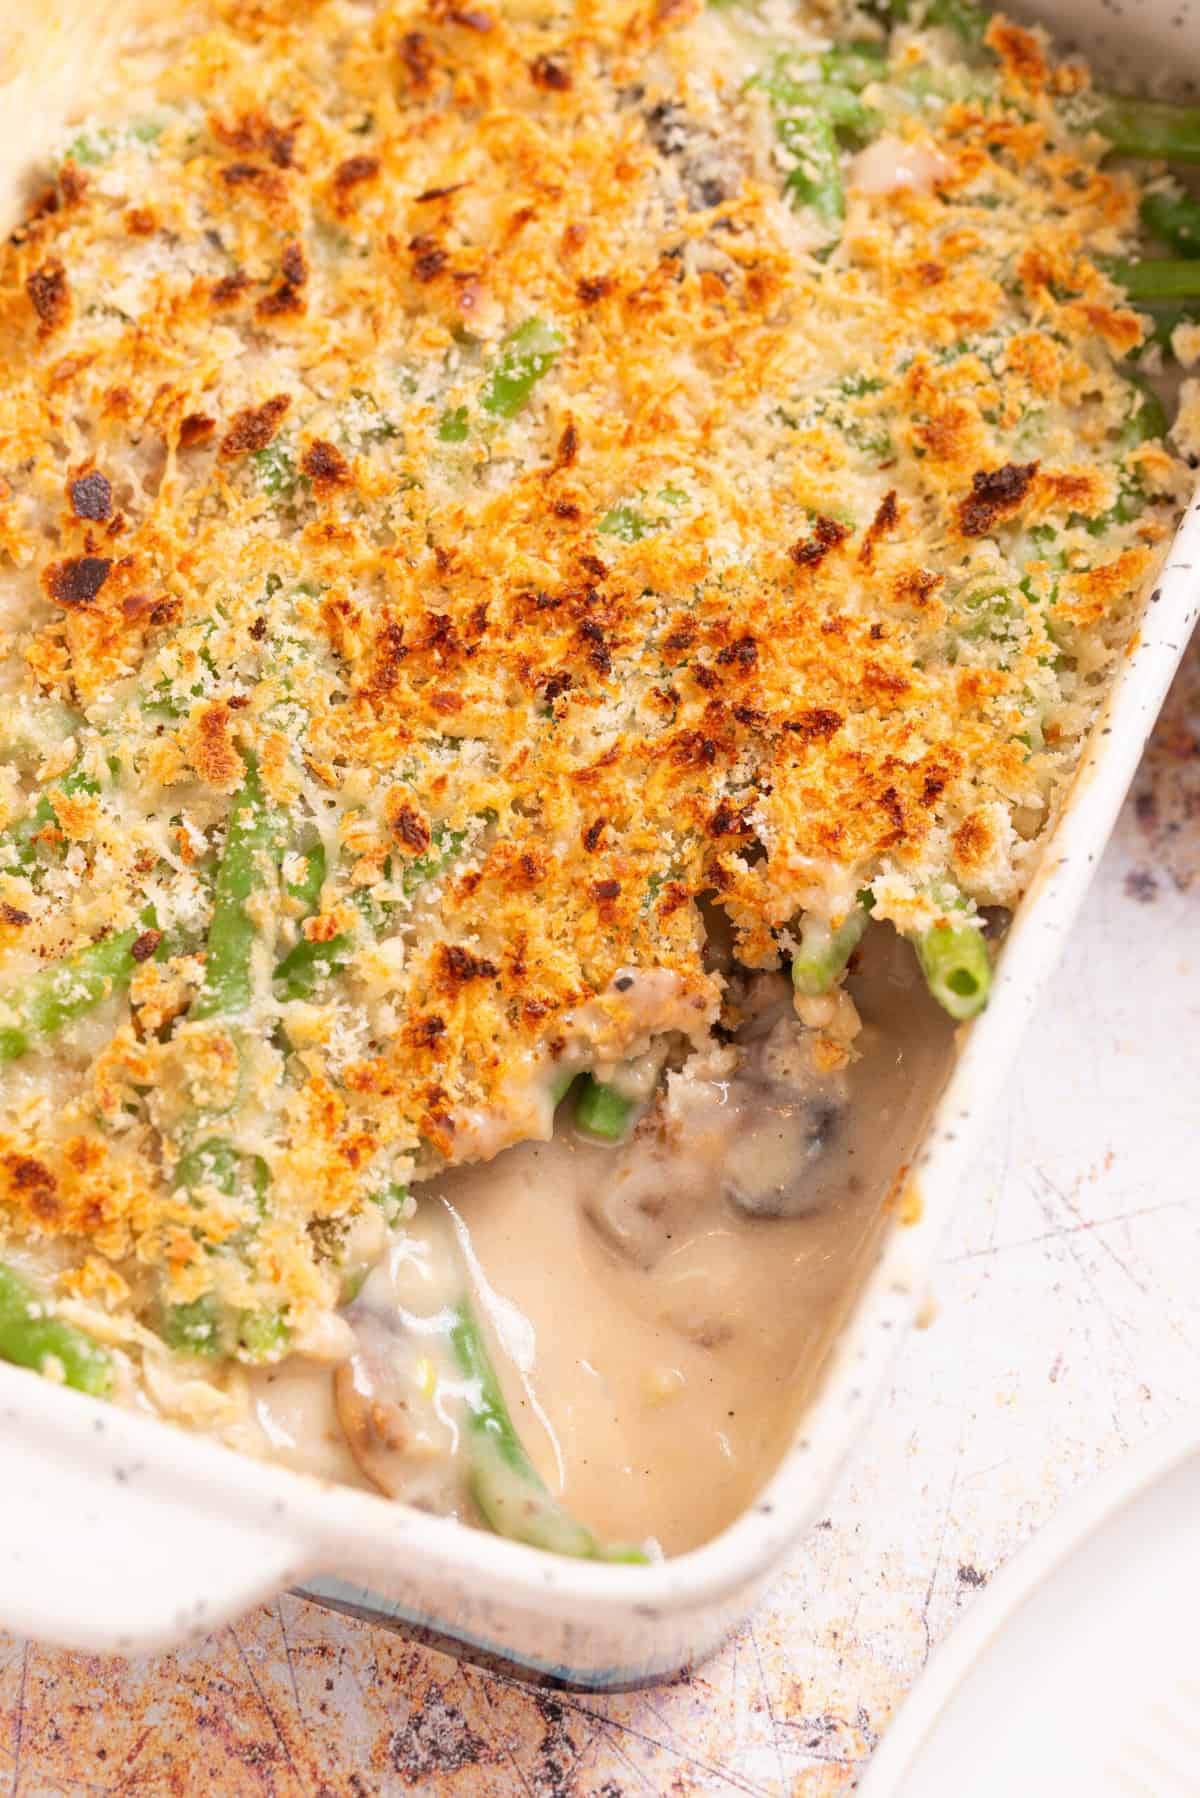 An overhead image of green bean casserole with a serving missing frmo the casserole dish.